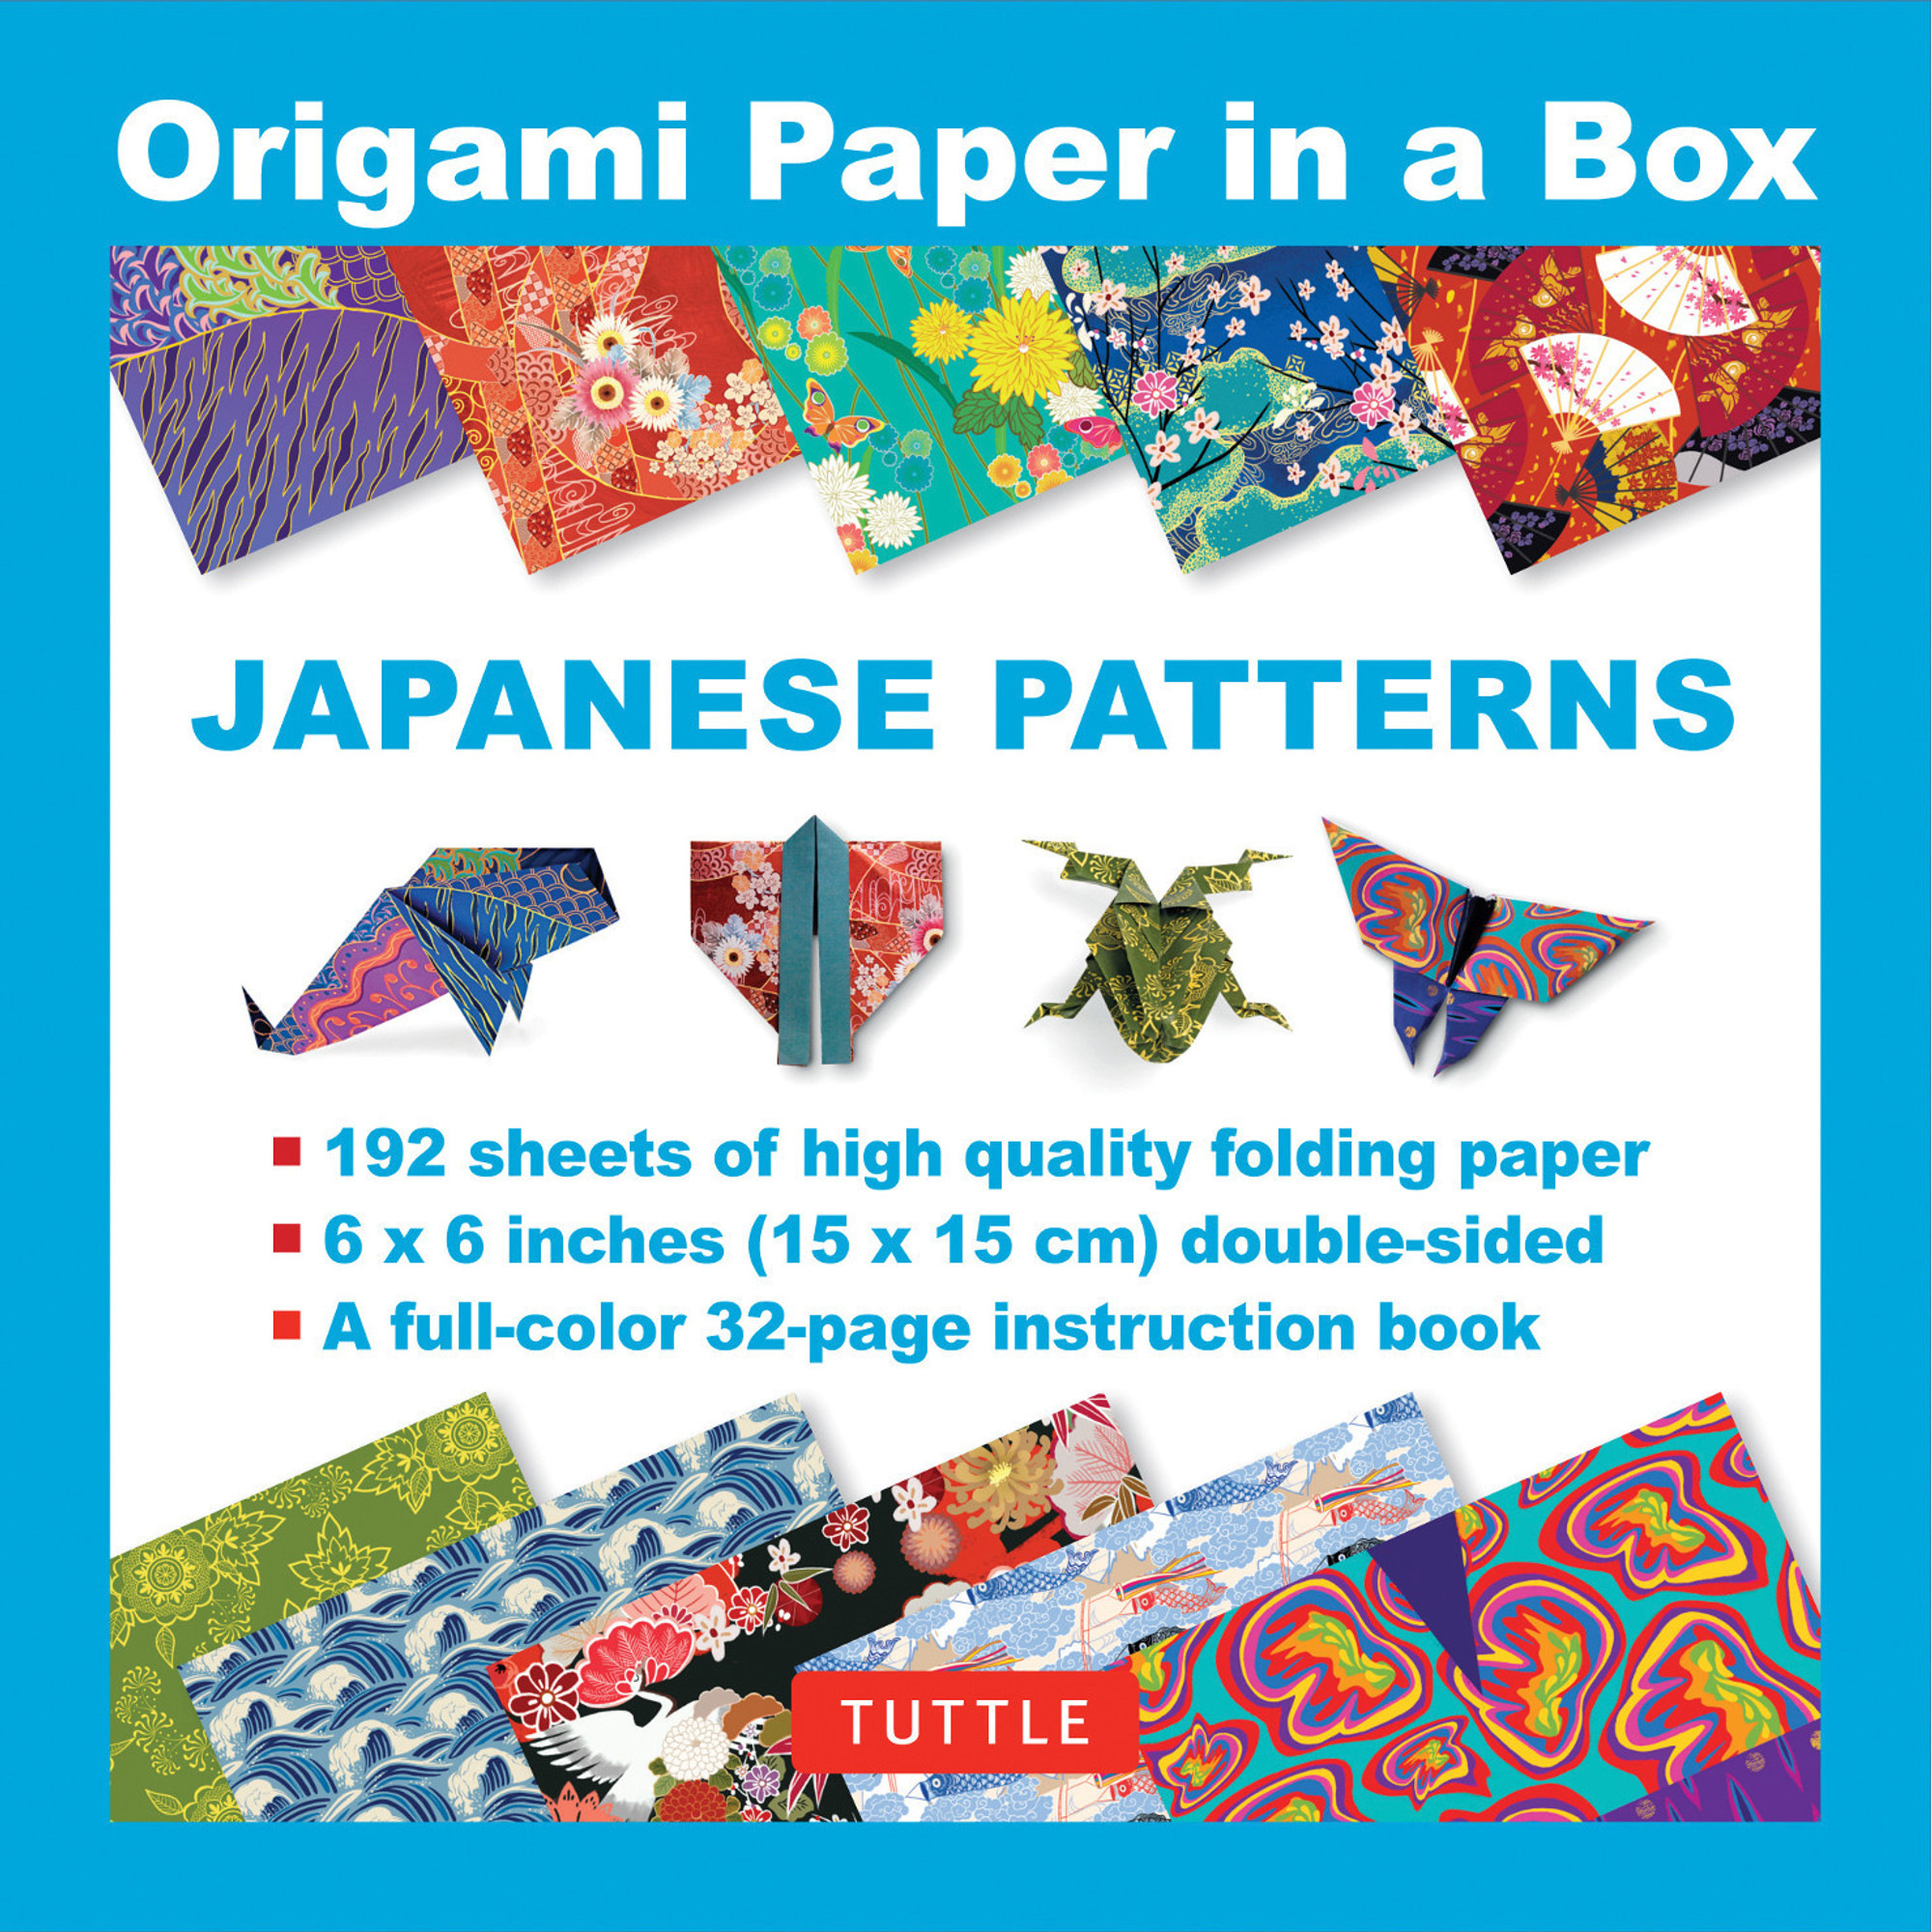 Origami Paper in a Box - Japanese Patterns (9780804846066)